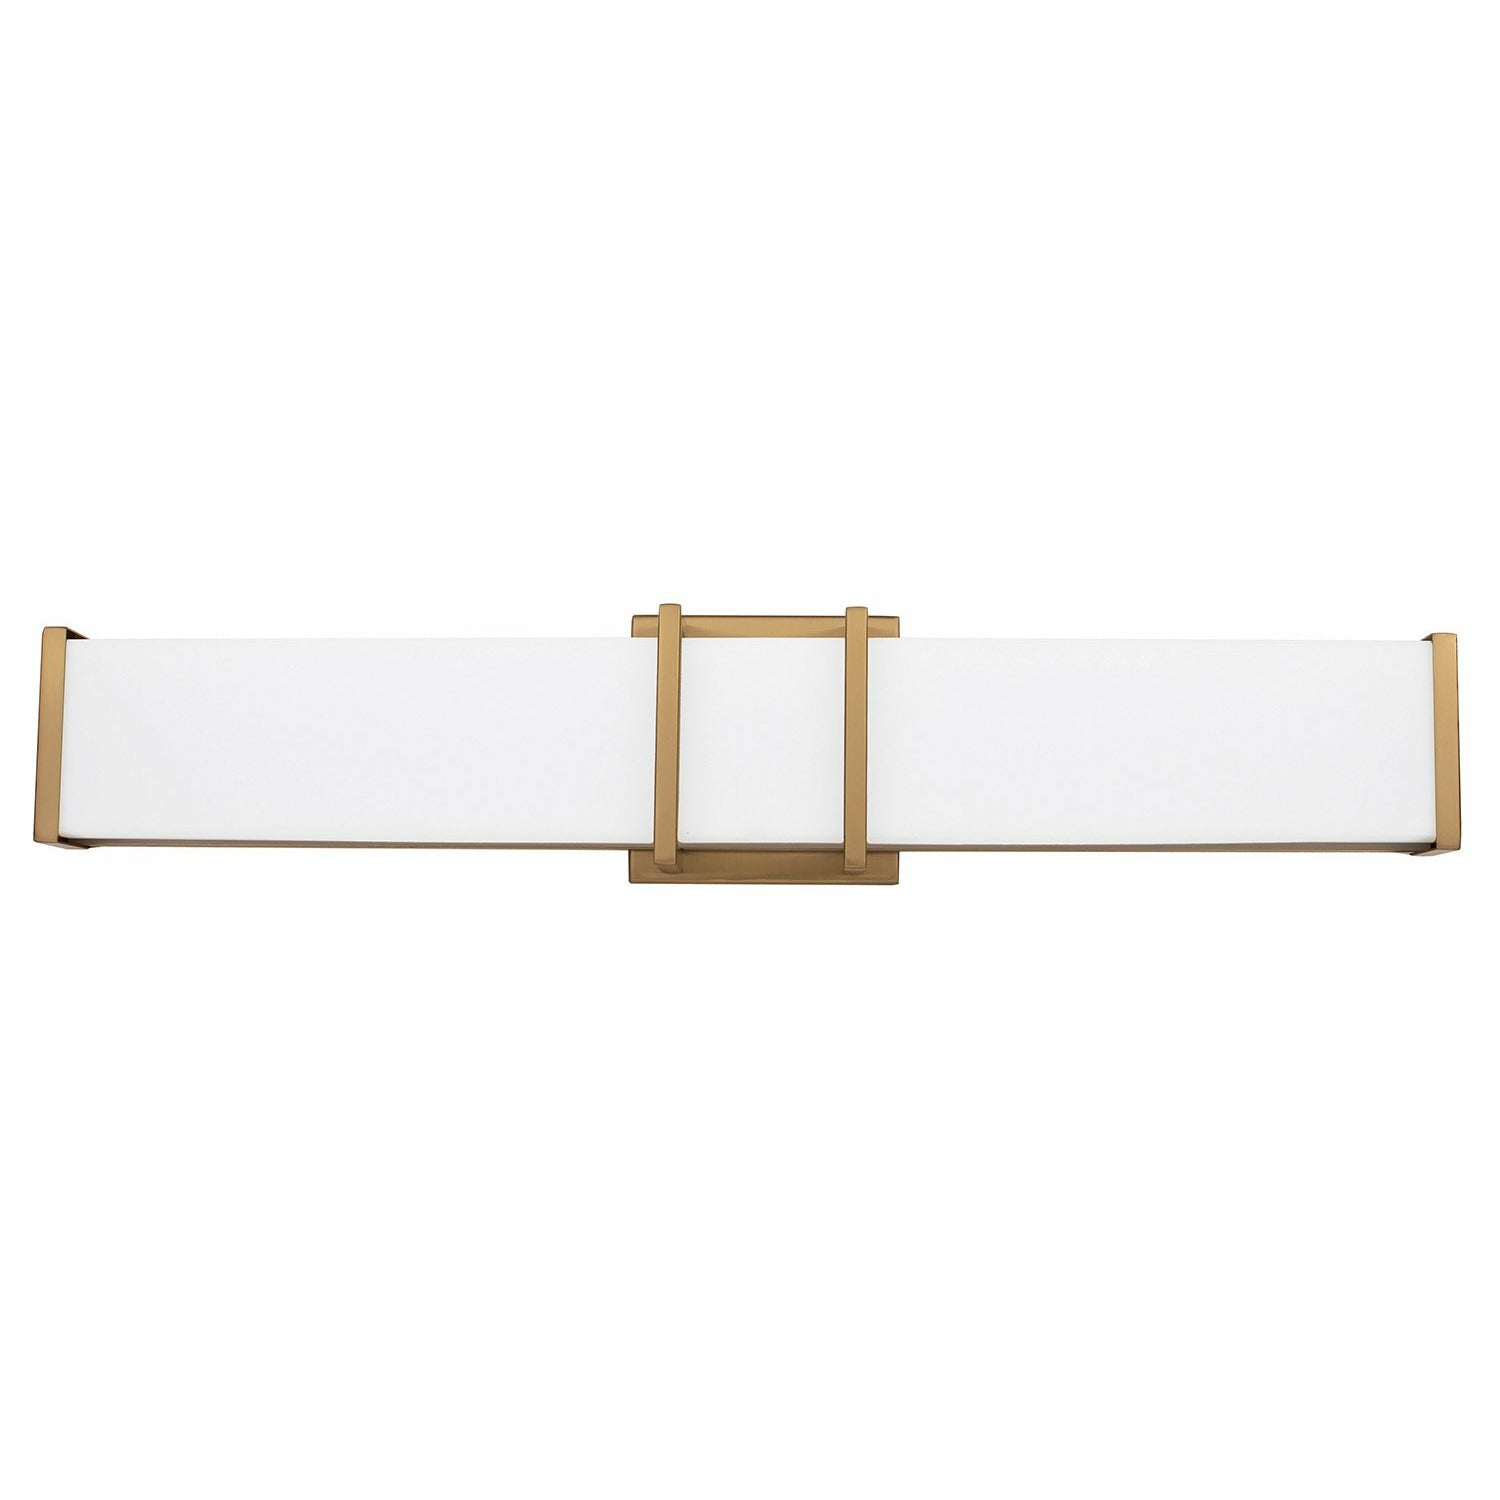 Tomero Sconce Brushed Gold